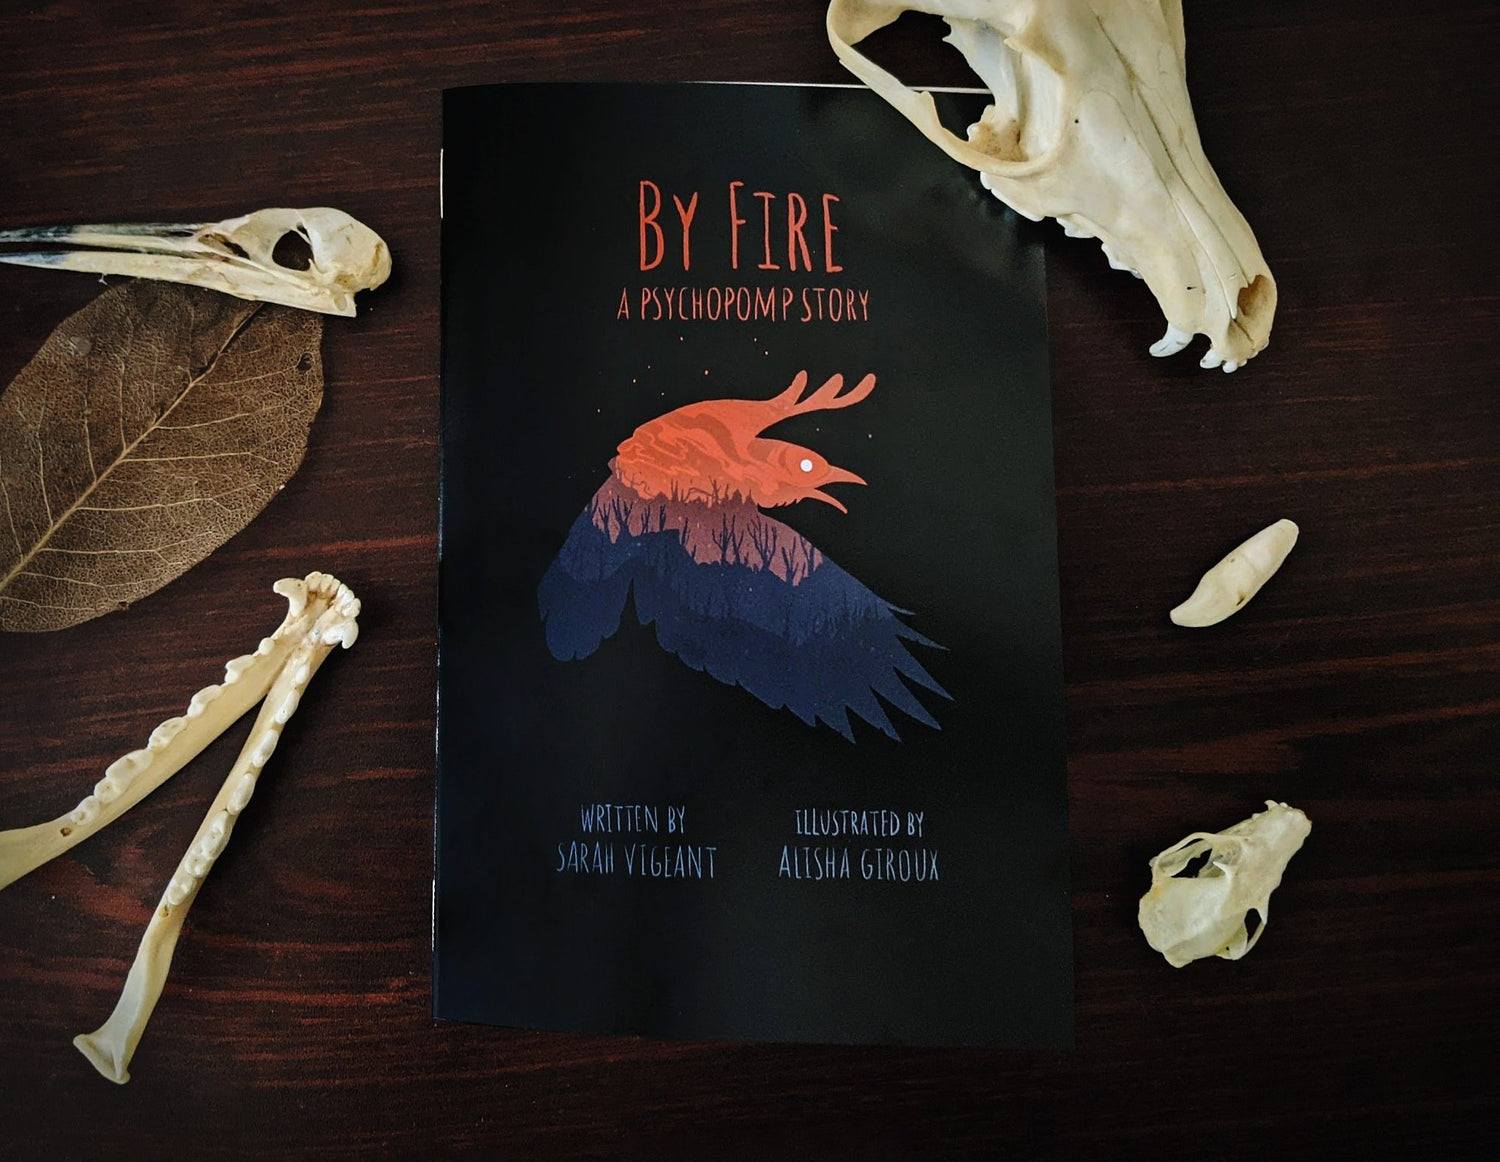 A comic book with a flying crow on the cover. The title reads 'By Fire'. The book lies on a dark table surrounded by animal skulls.